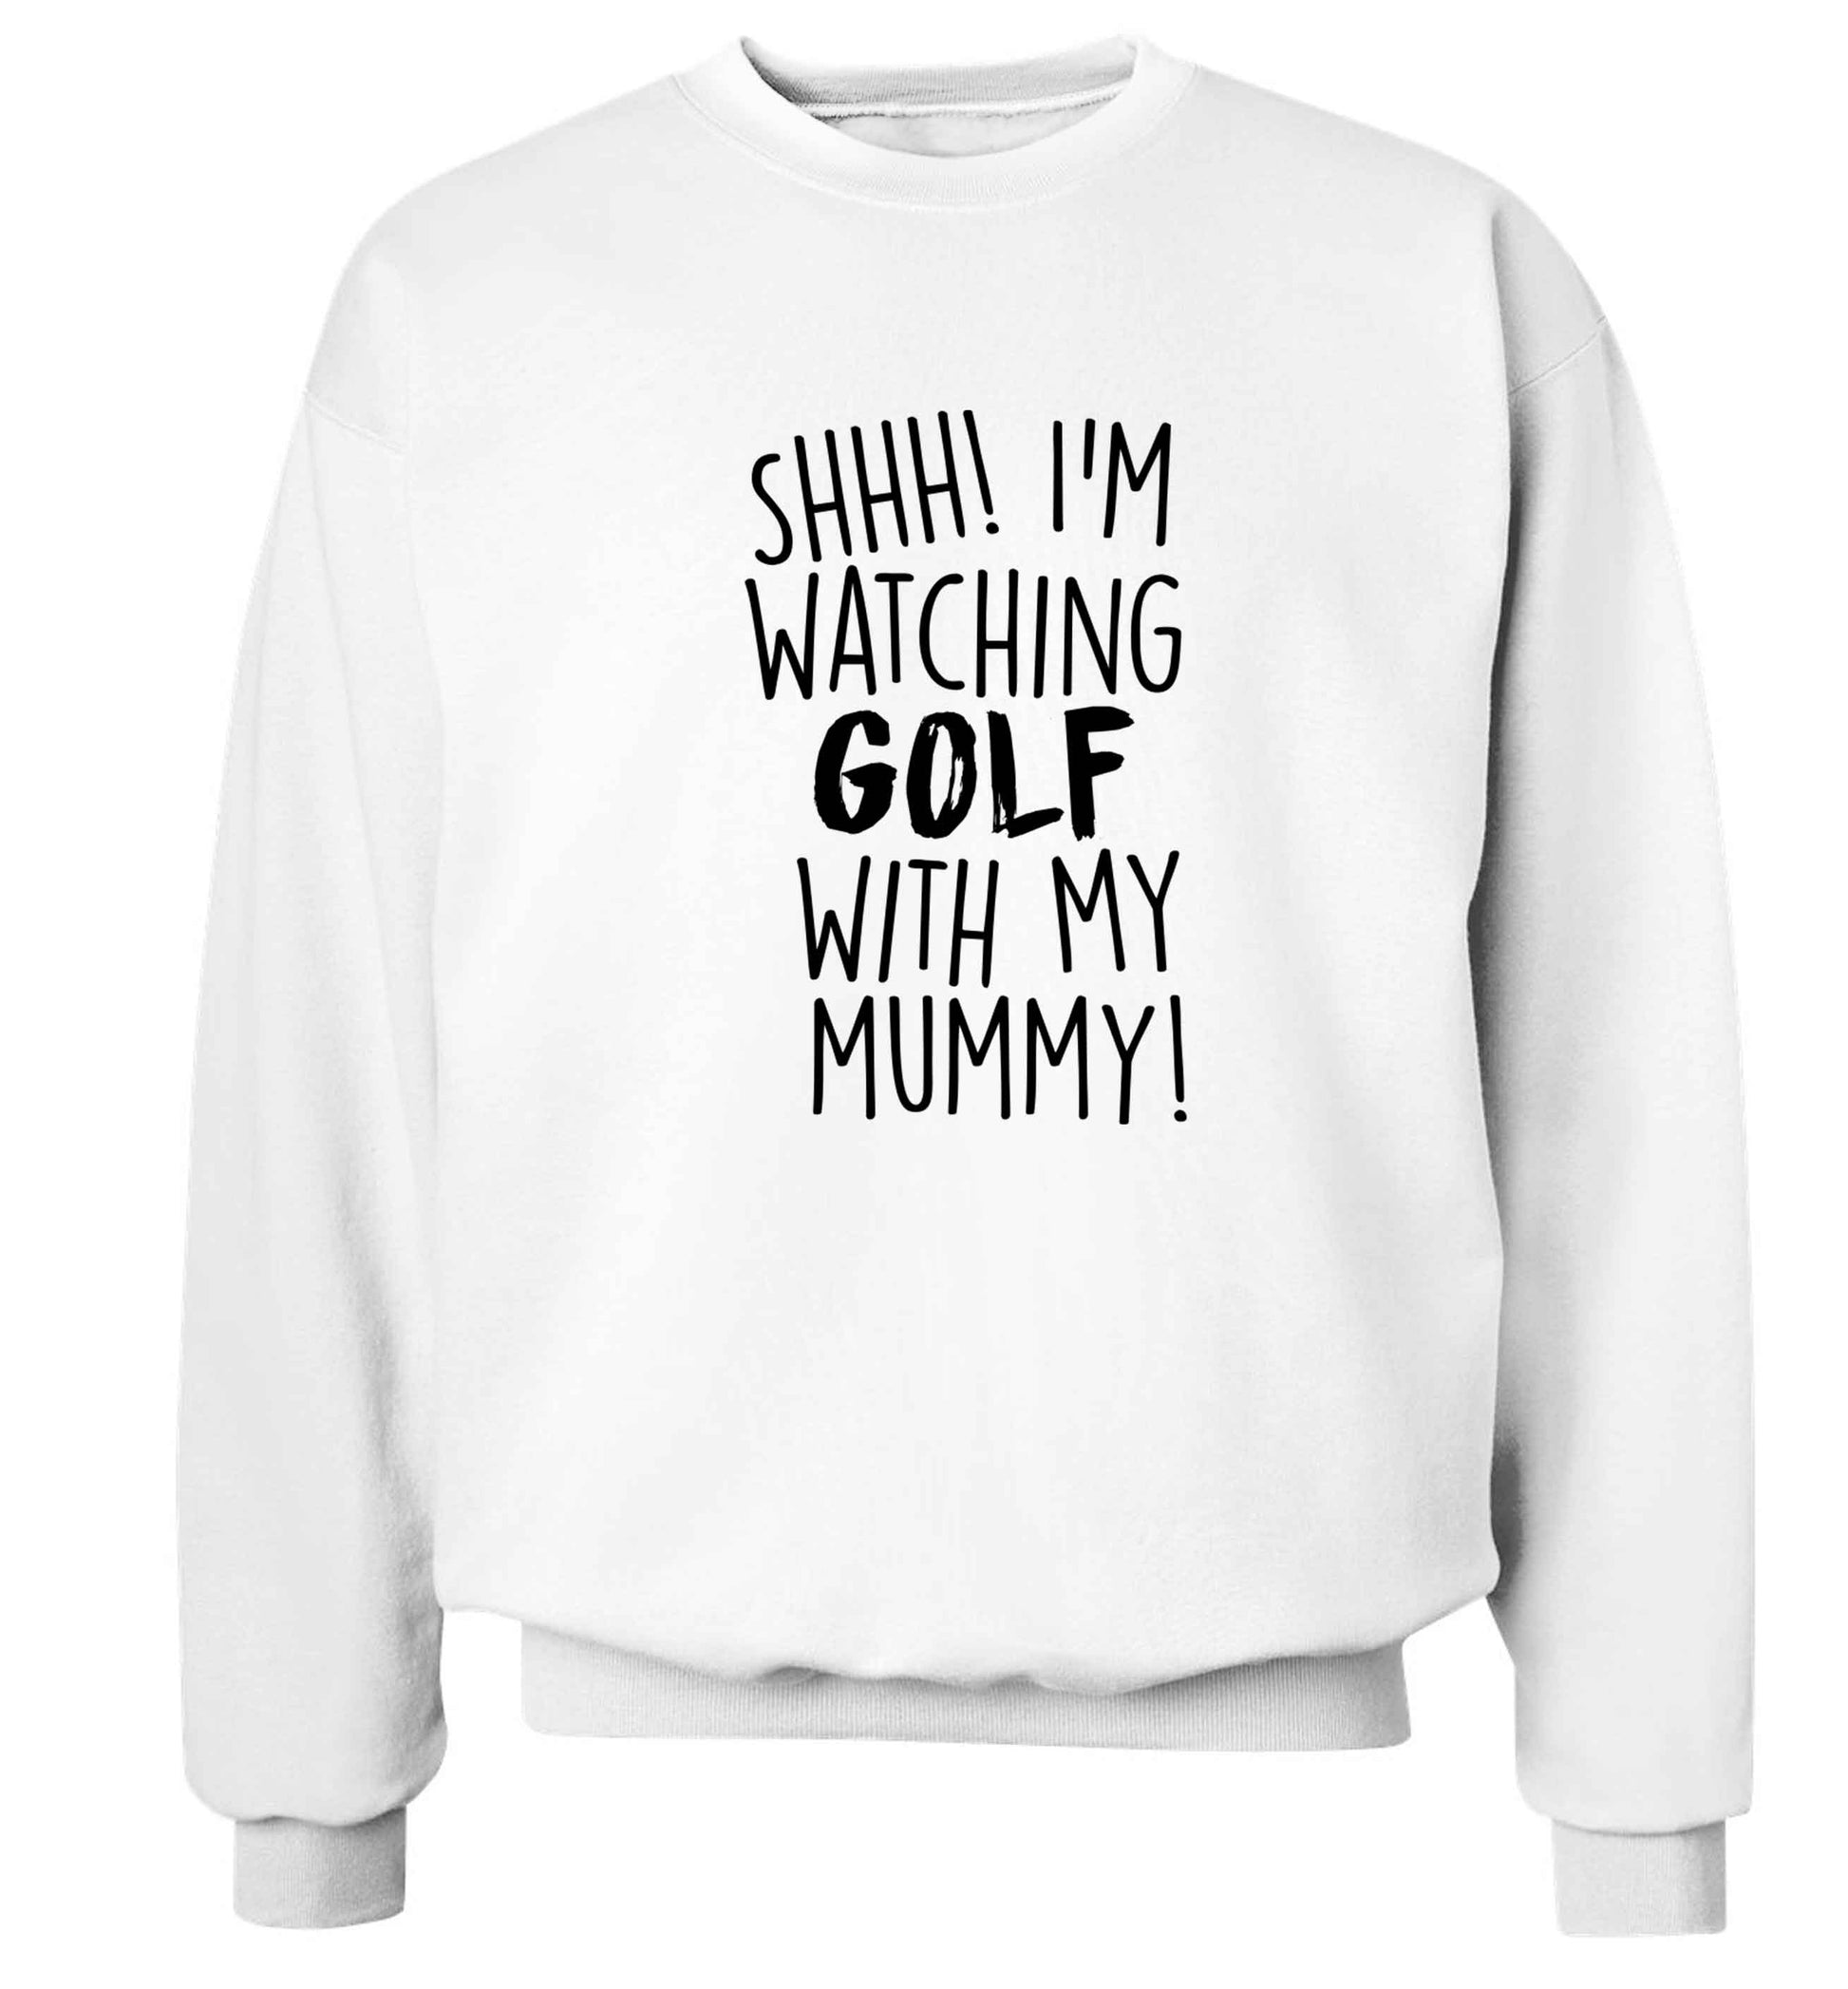 Shh I'm watching golf with my mummy Adult's unisex white Sweater 2XL